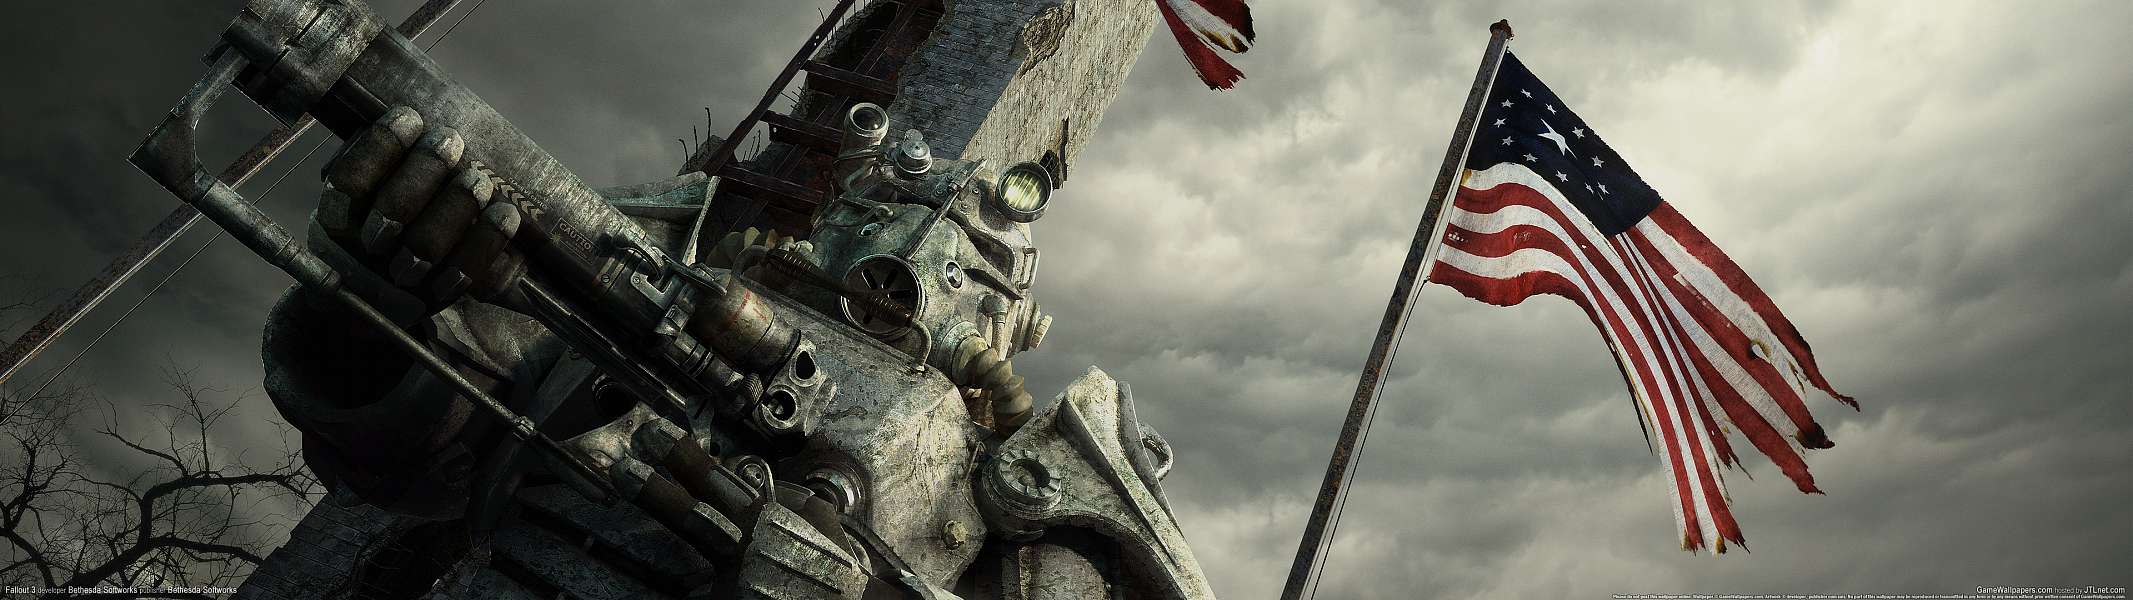 Fallout 3 dual screen wallpaper or background